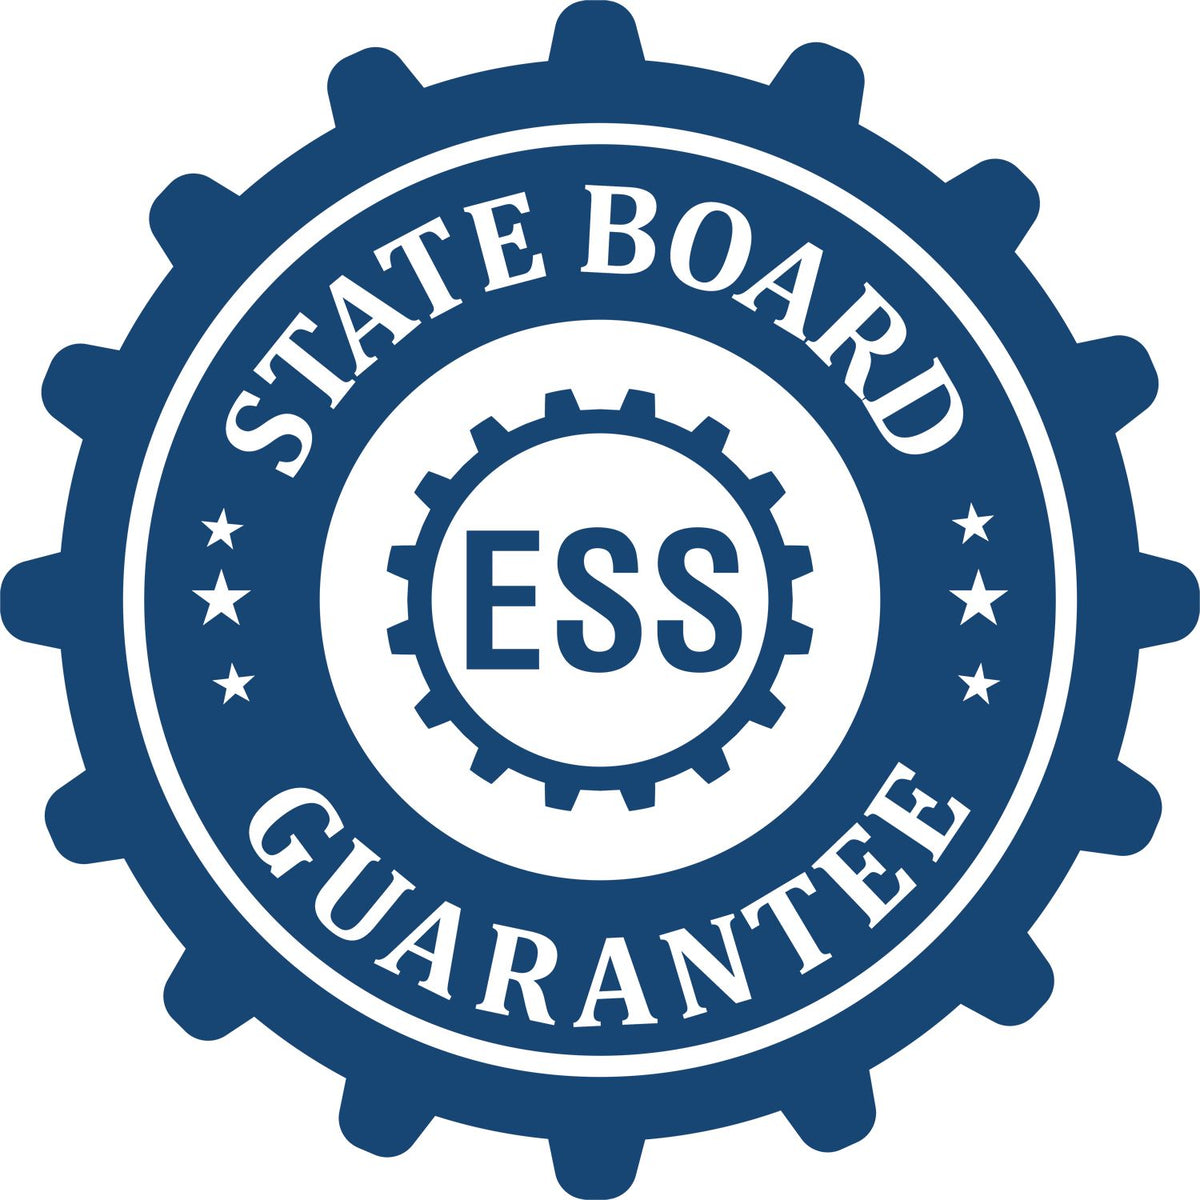 An emblem in a gear shape illustrating a state board guarantee for the Ohio Engineer Desk Seal product.